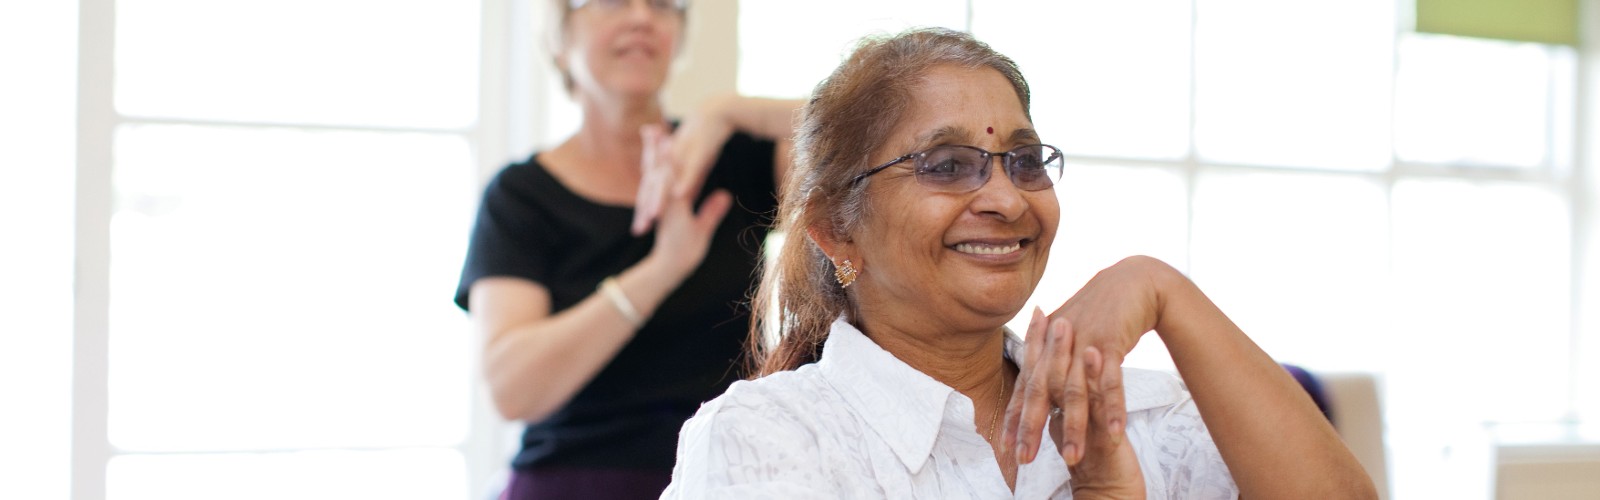 An older Asian lady smiling as she takes part in an ̽Ƶ exercise class